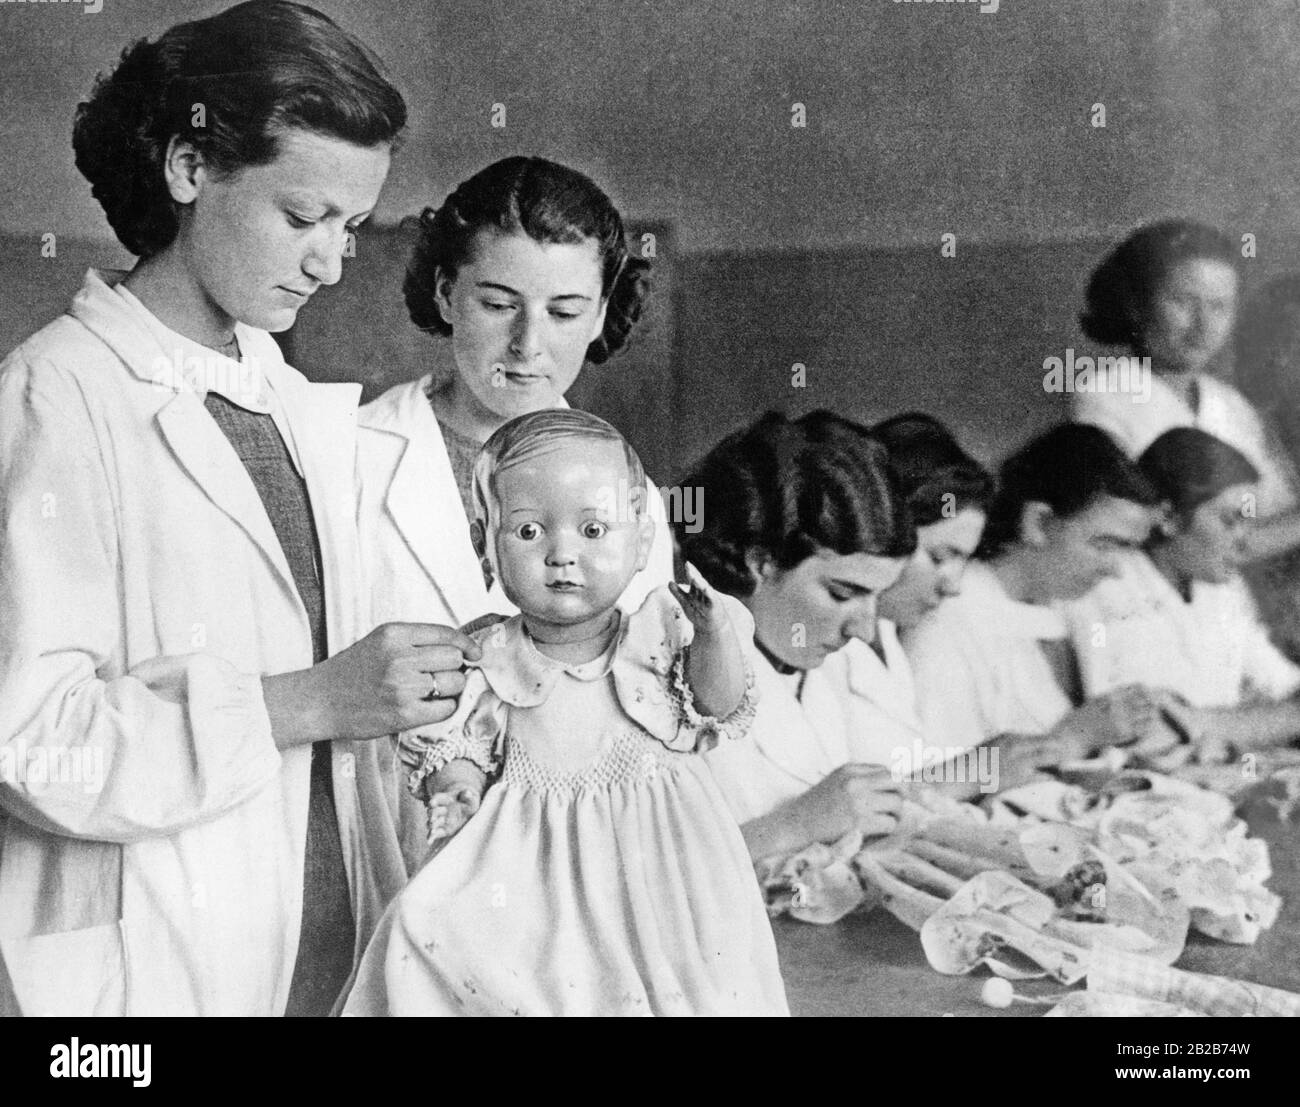 Turkish, unveiled young women during their training at the Ismet Pasha Institute in Ankara, where they learn domestic science and how to handle babies using dolls. Stock Photo